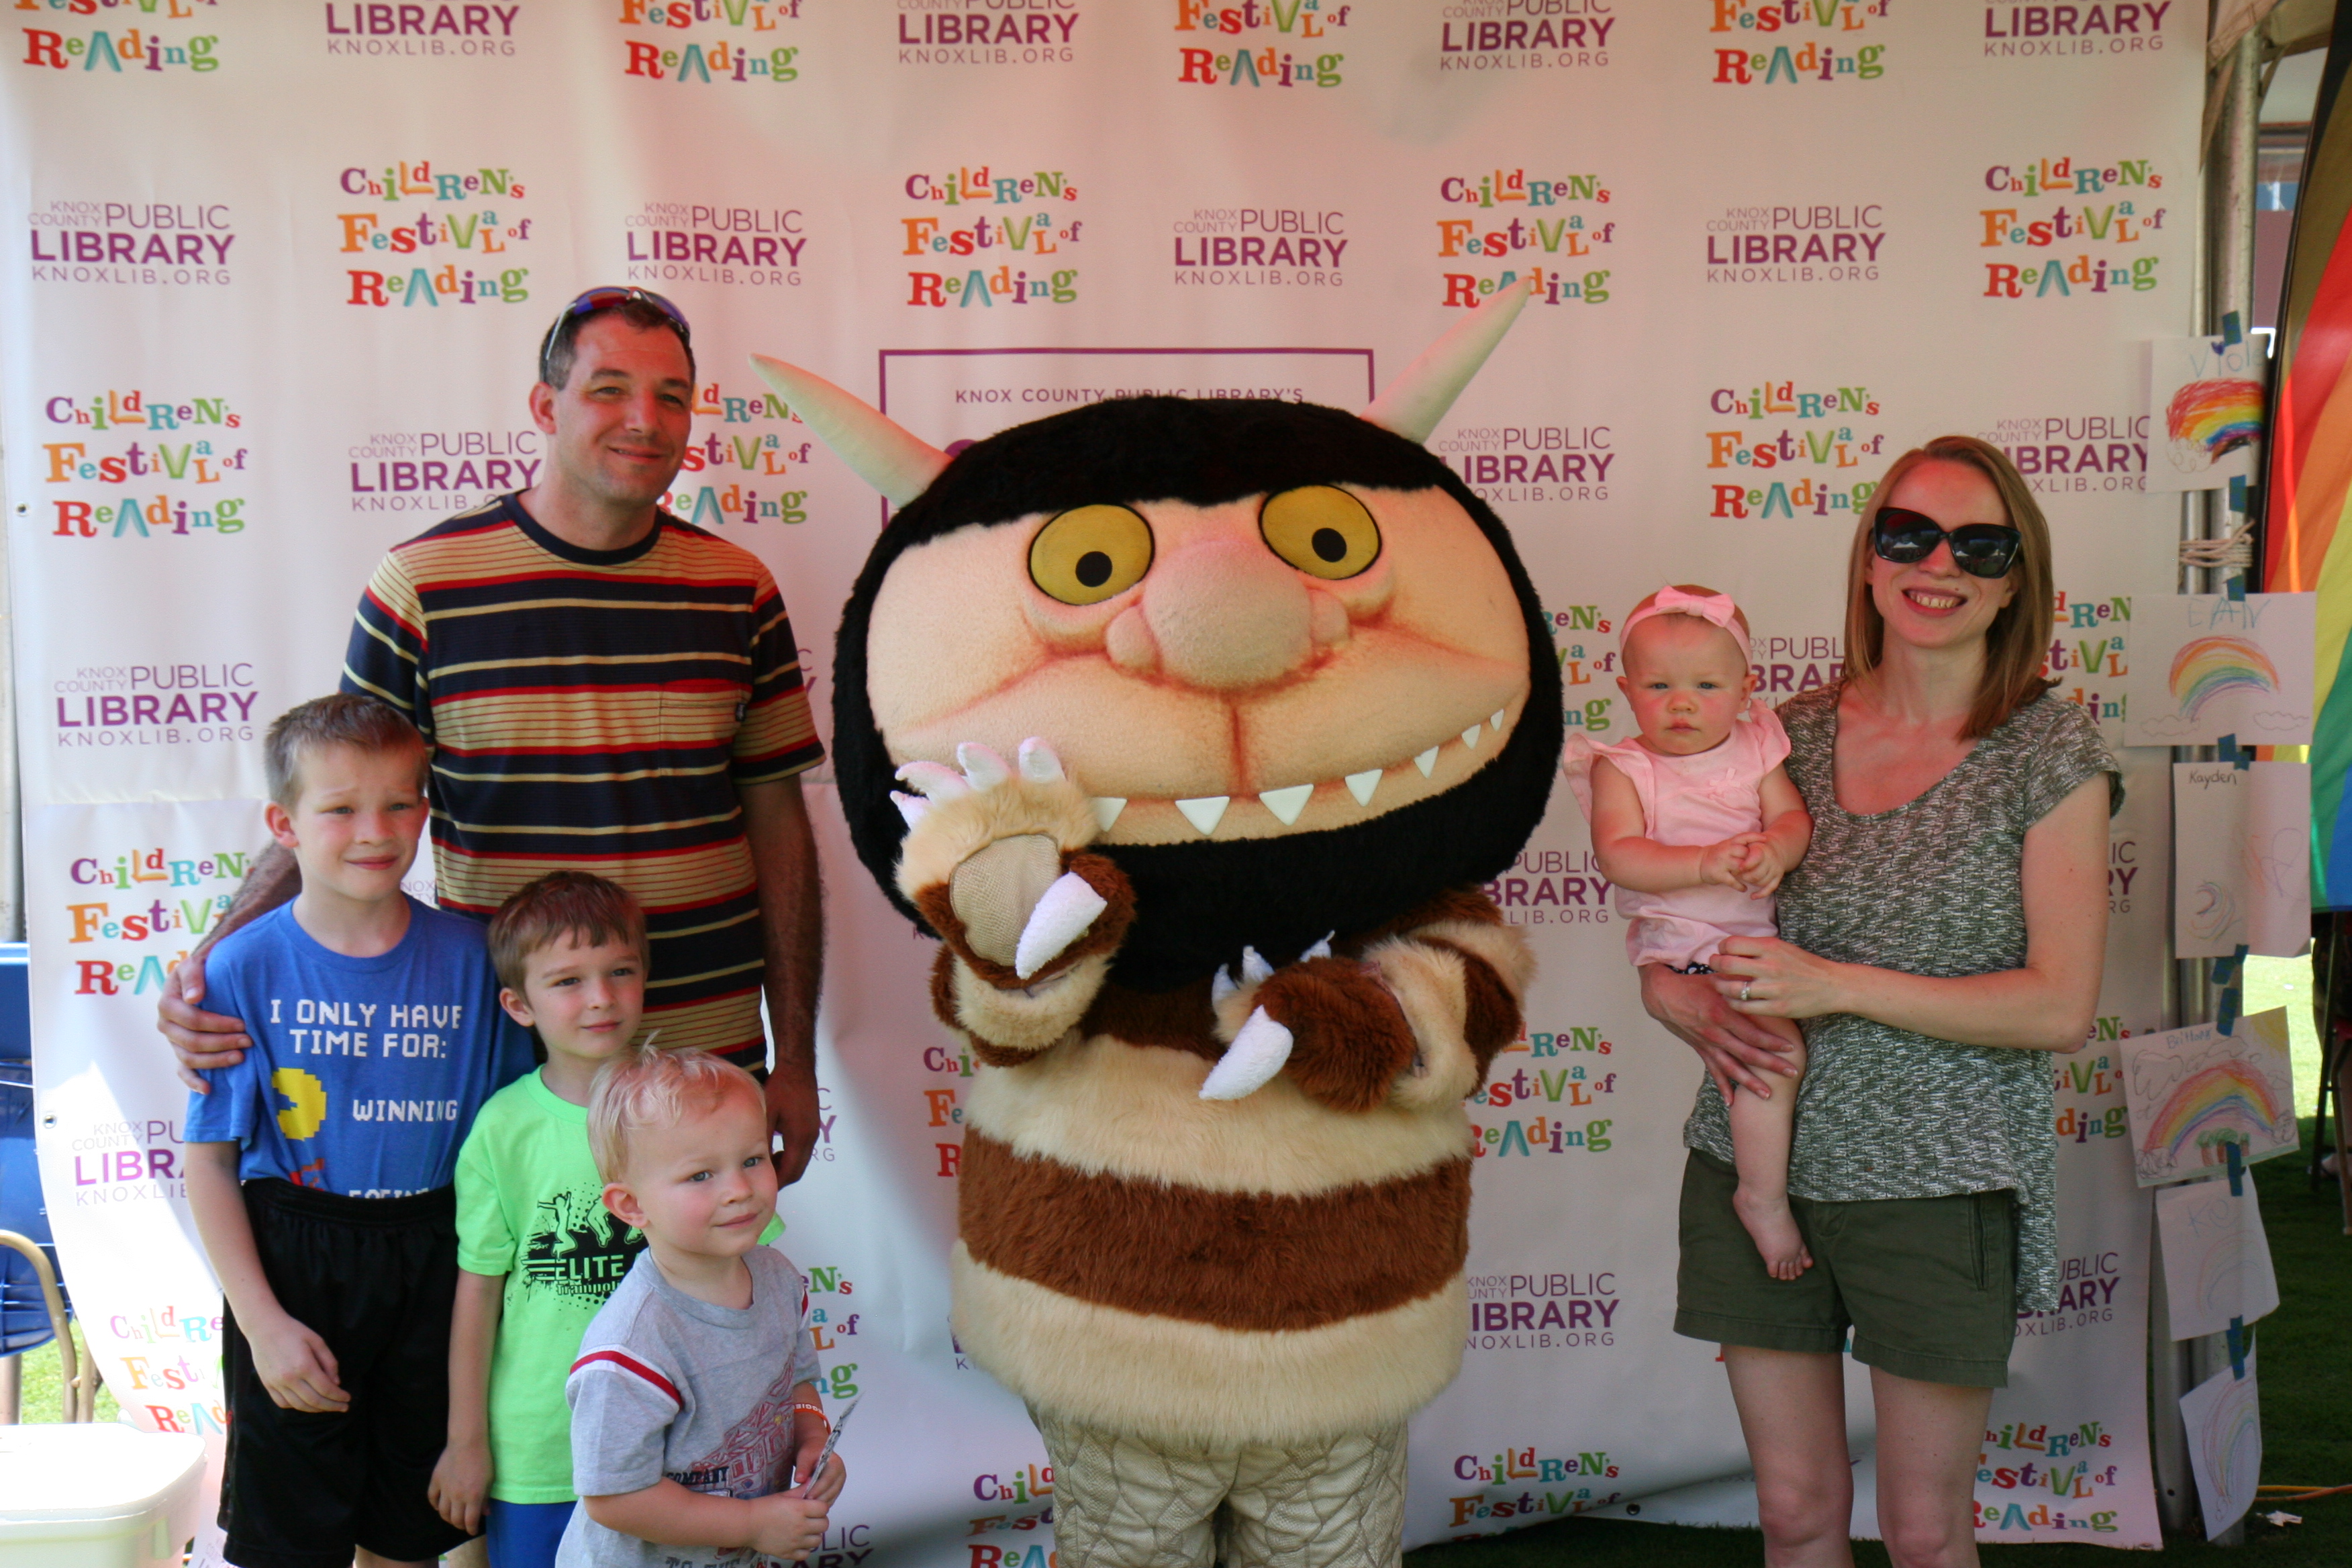 Family posing with the creature from Where the Wild Things Are